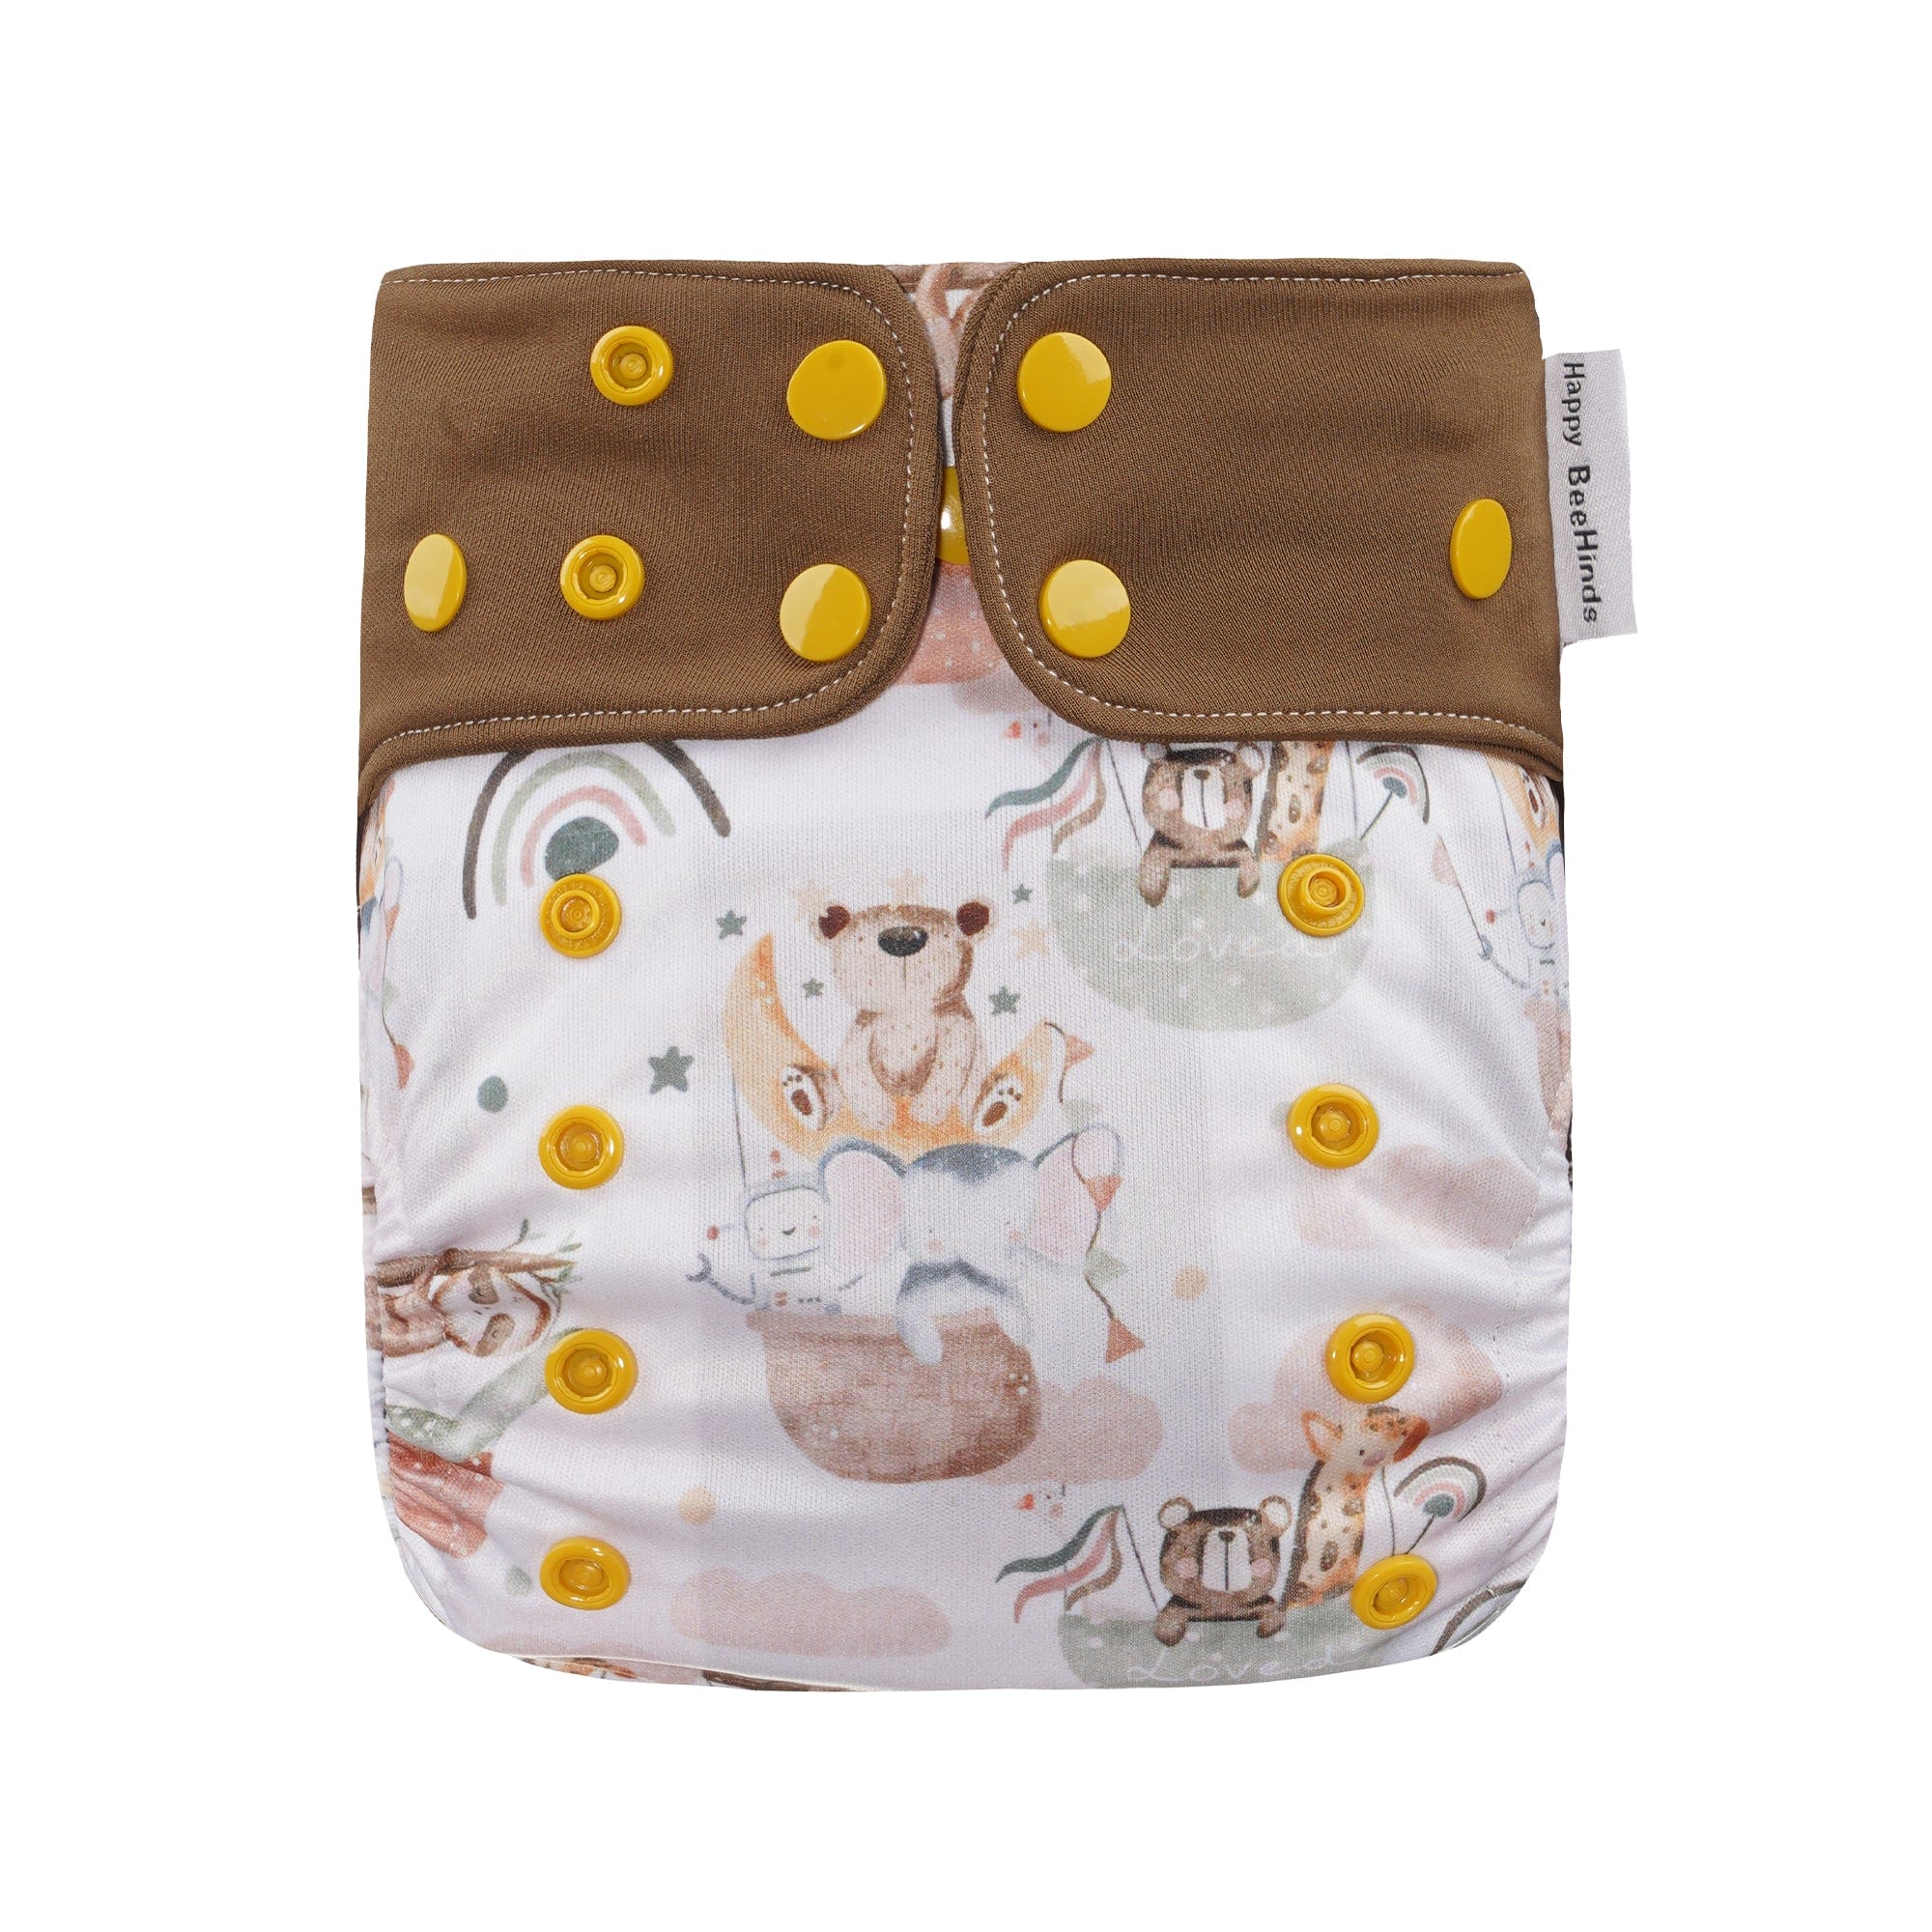 Perfect Fit Pocket Diaper By Happy Beehinds - Prints